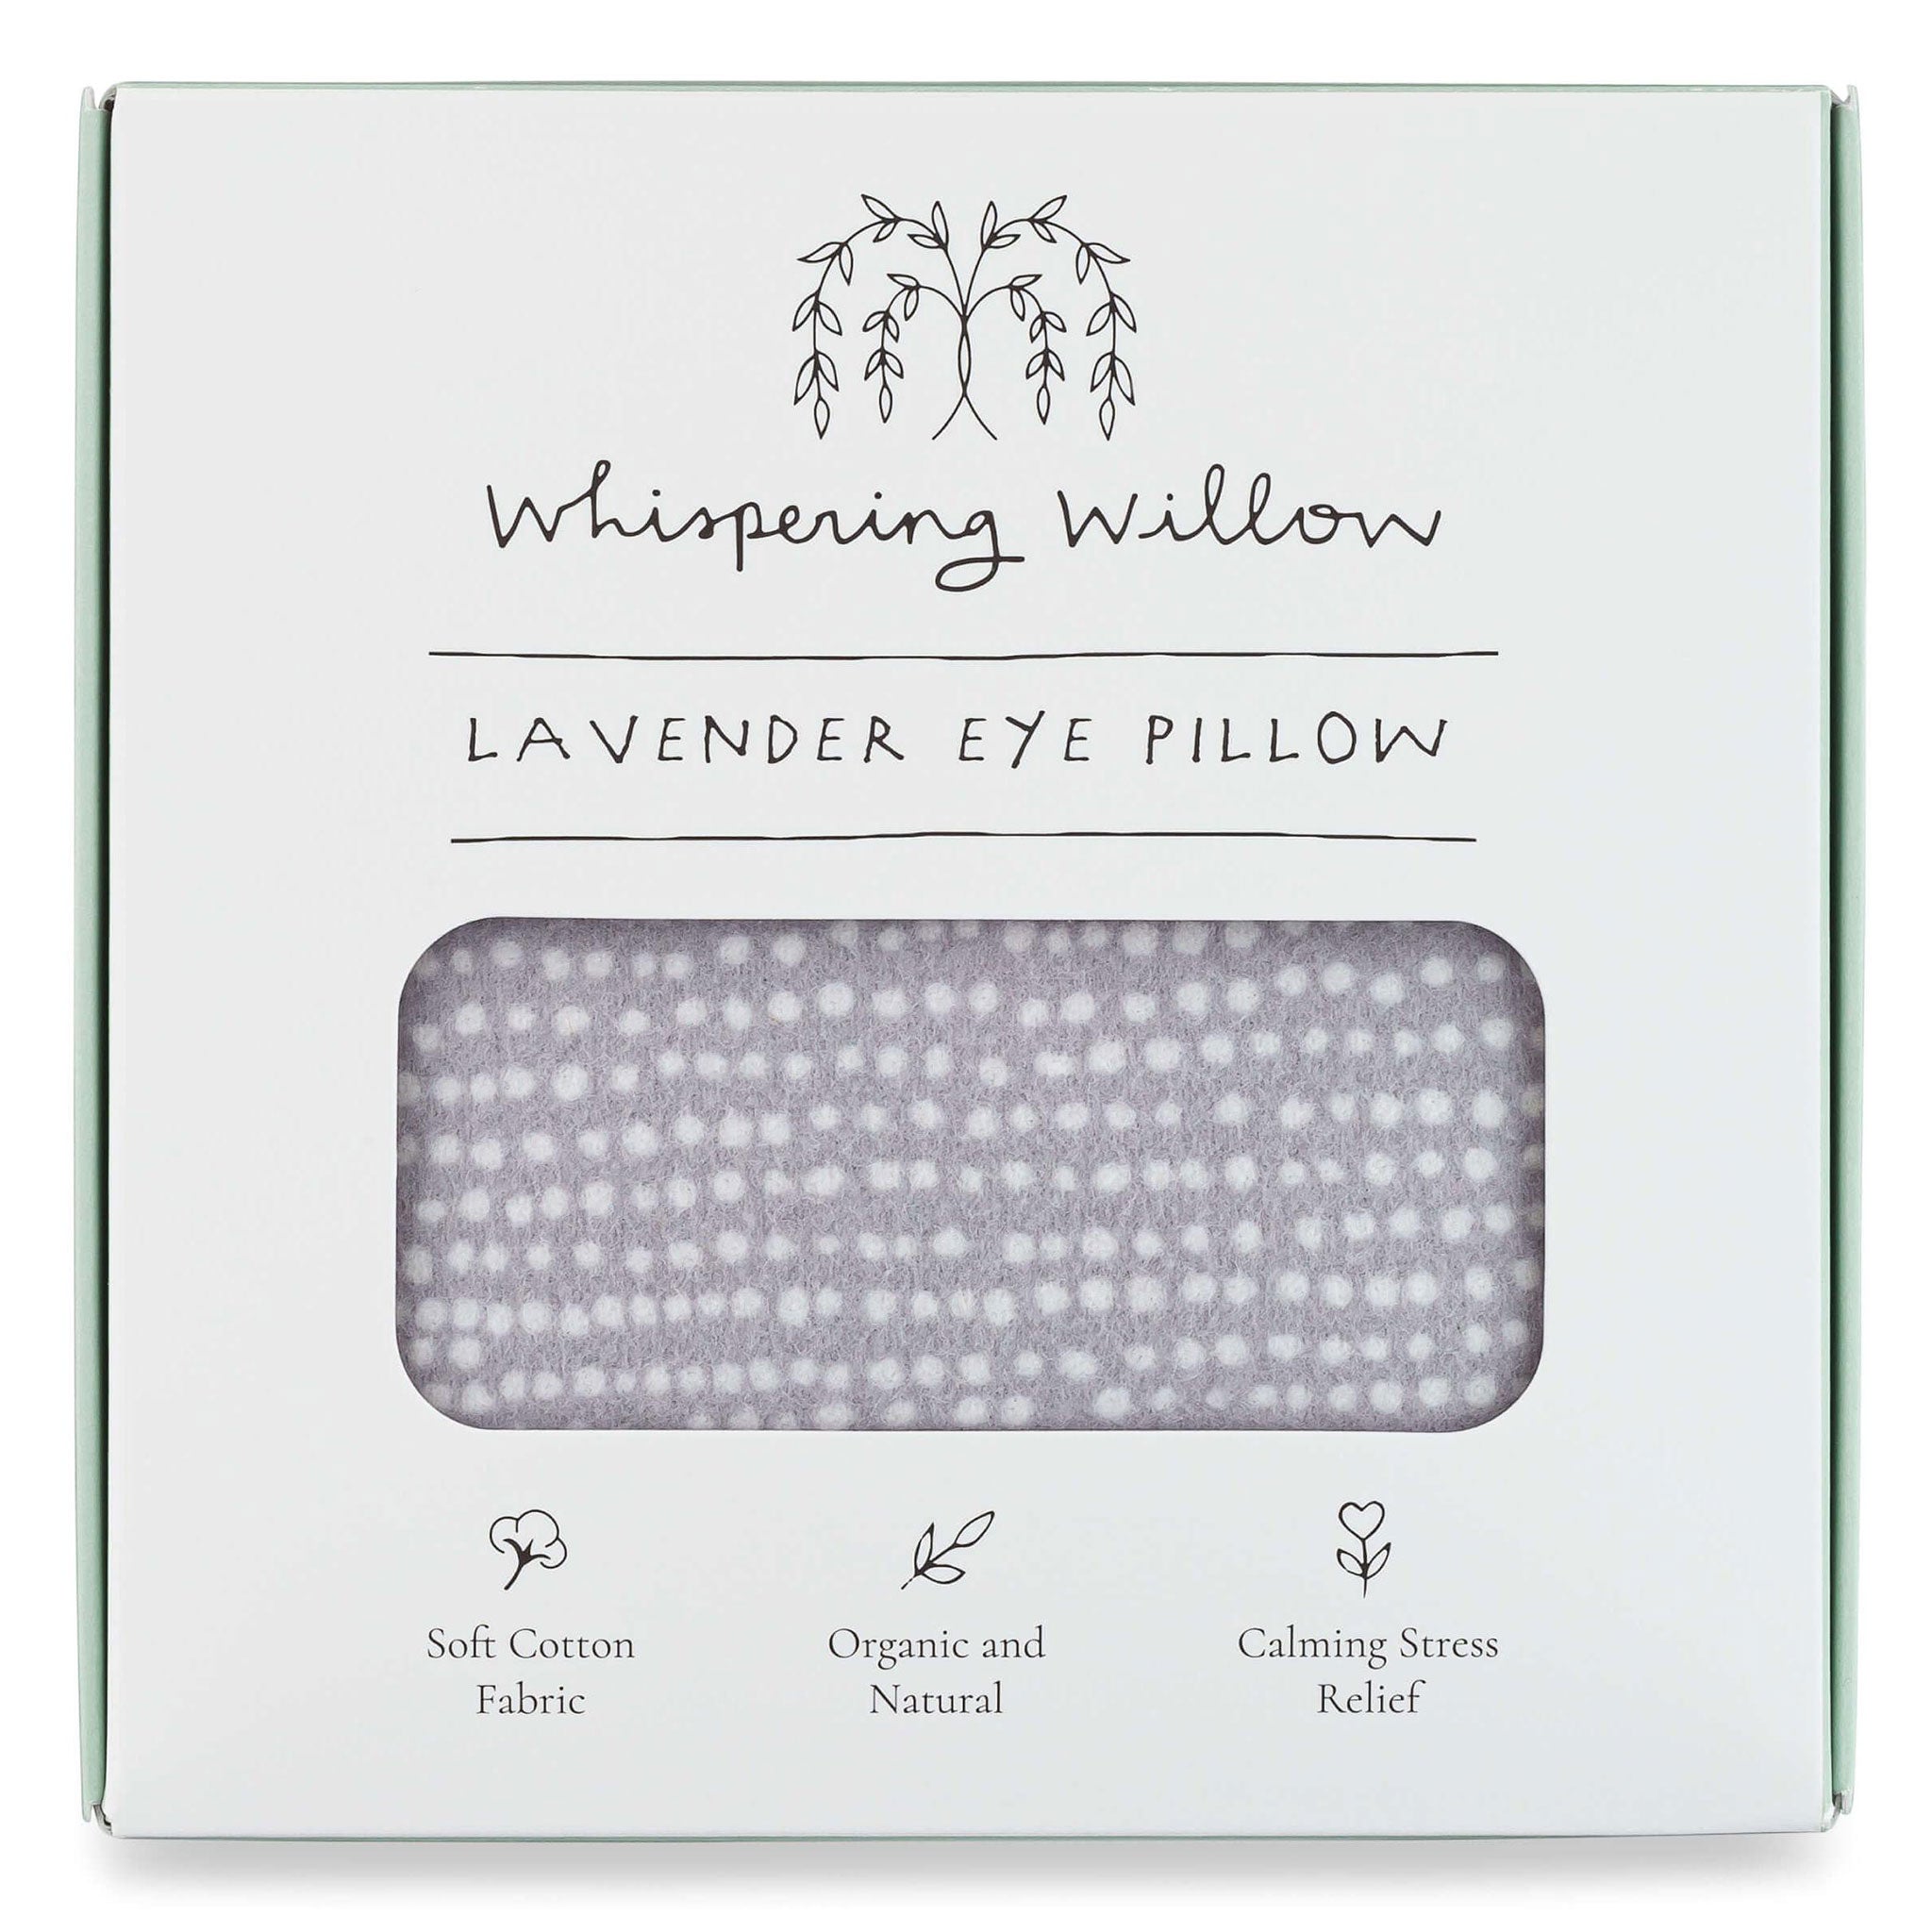 Lavender Eye Pillow in Tranquil Gray cotton